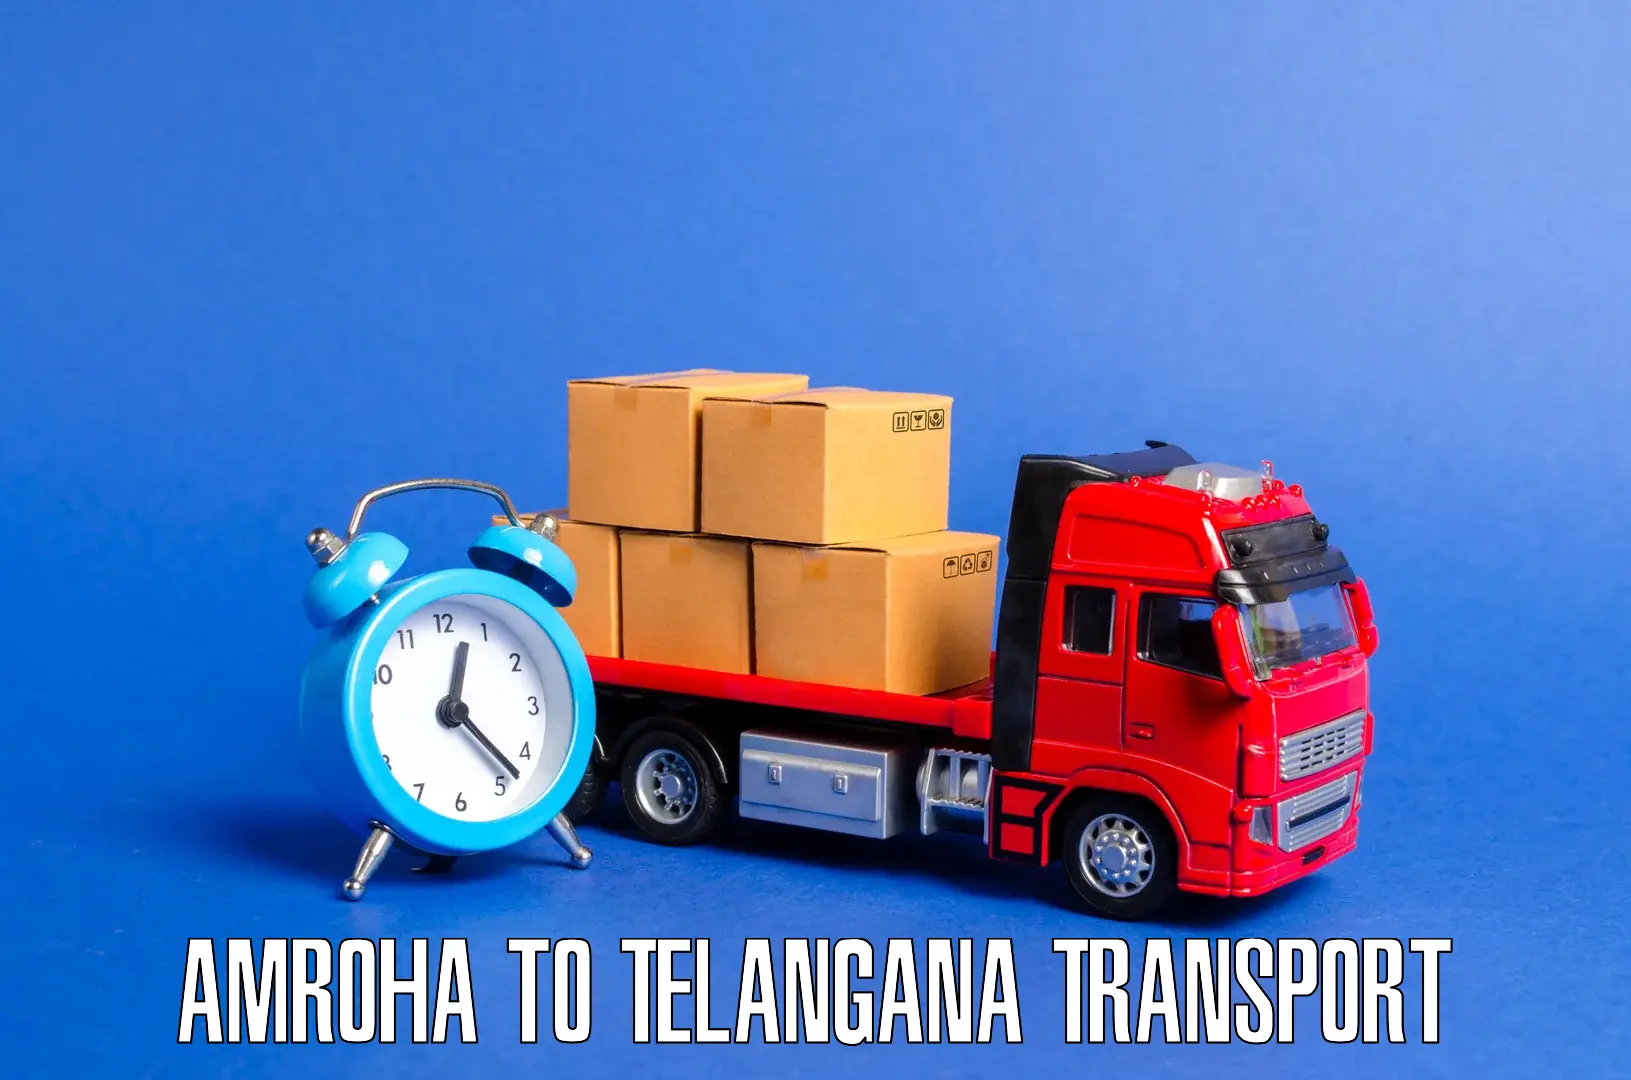 Container transportation services in Amroha to Sikanderguda